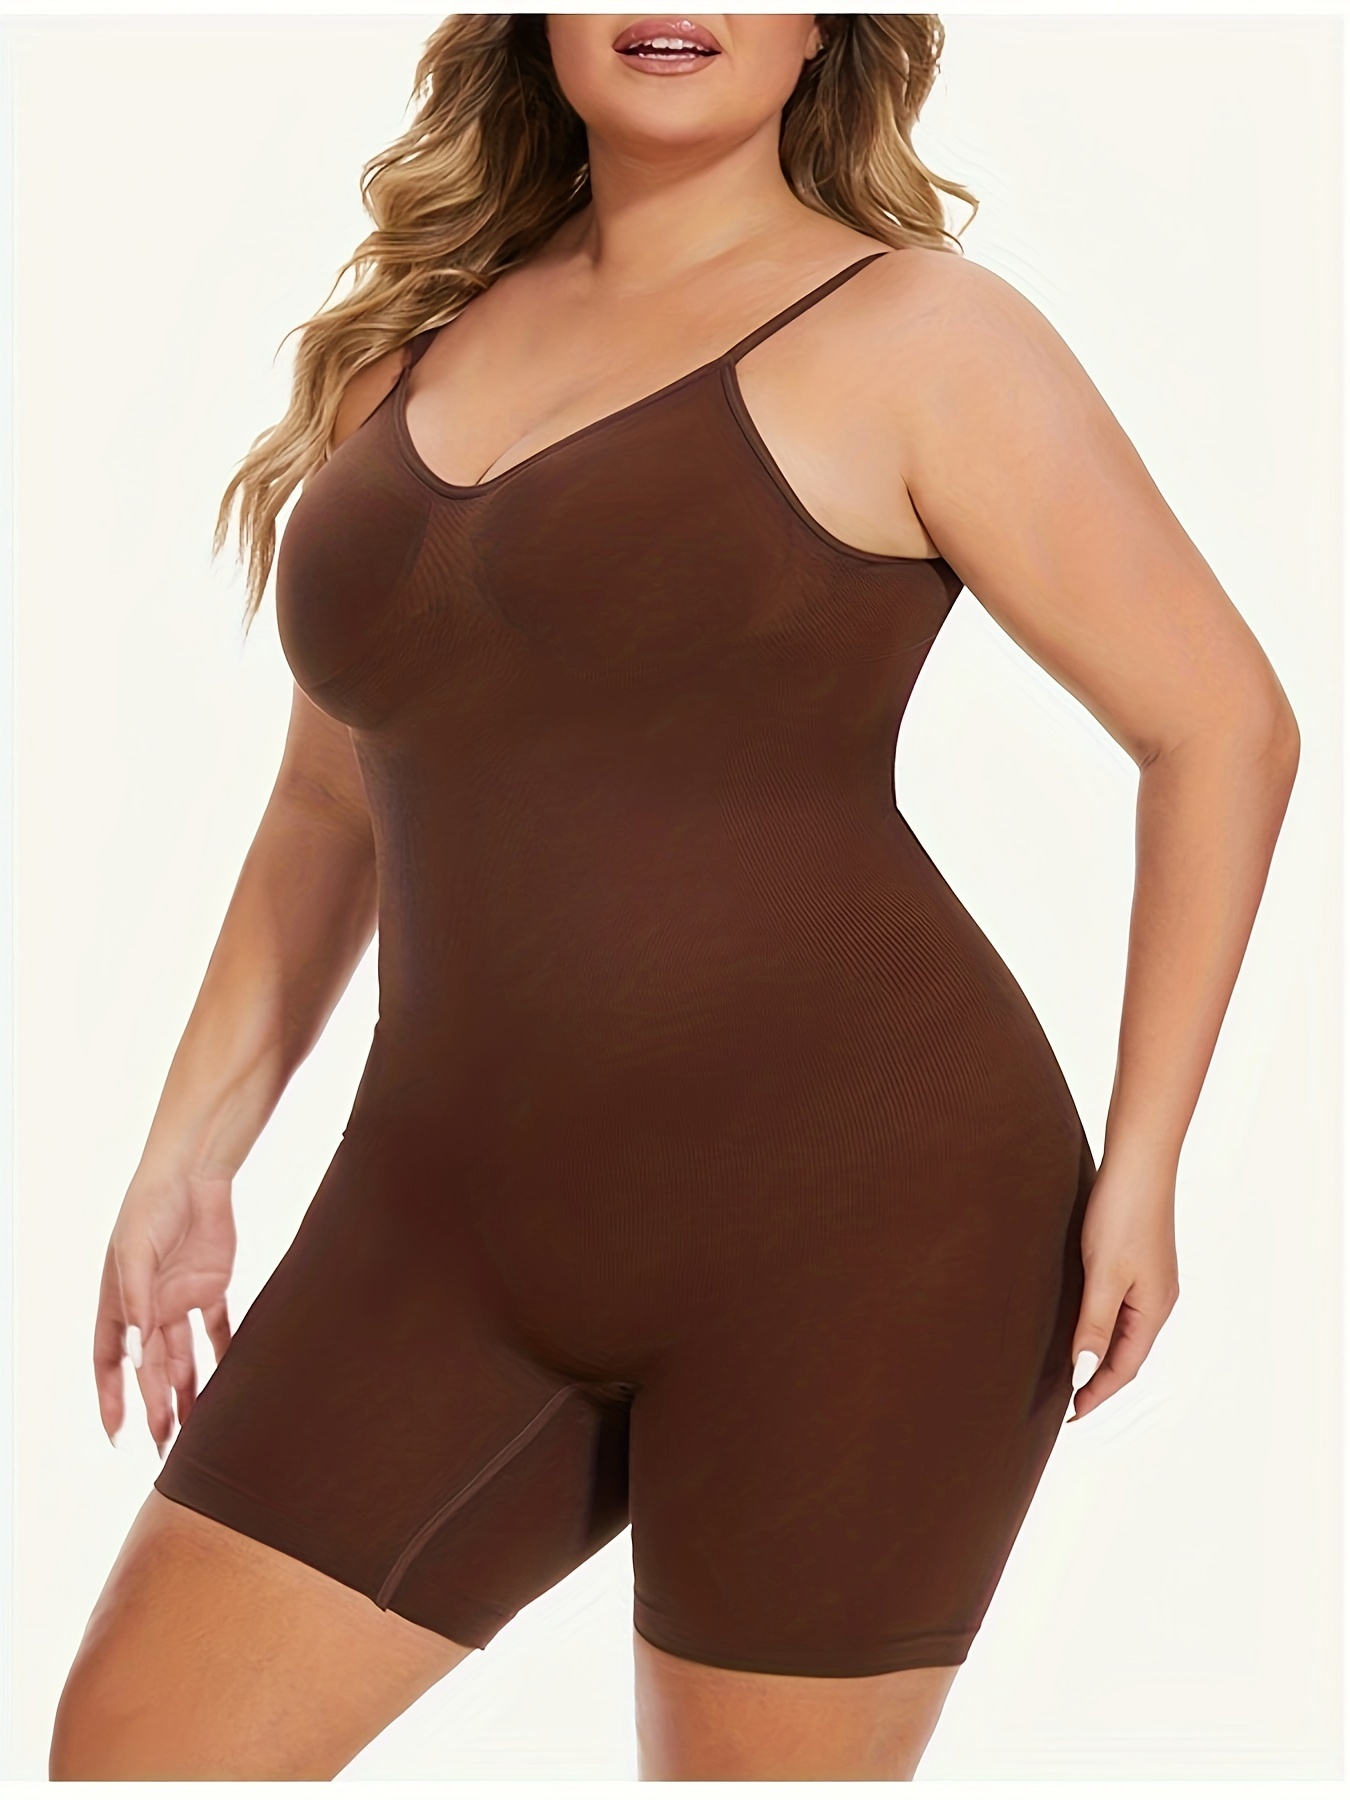 Women's Simple Shapewear Bodysuit, Plus Size Tummy Control Butt Lifting  Open Back Seamless Full Body Shaper, Don't Miss These Great Deals